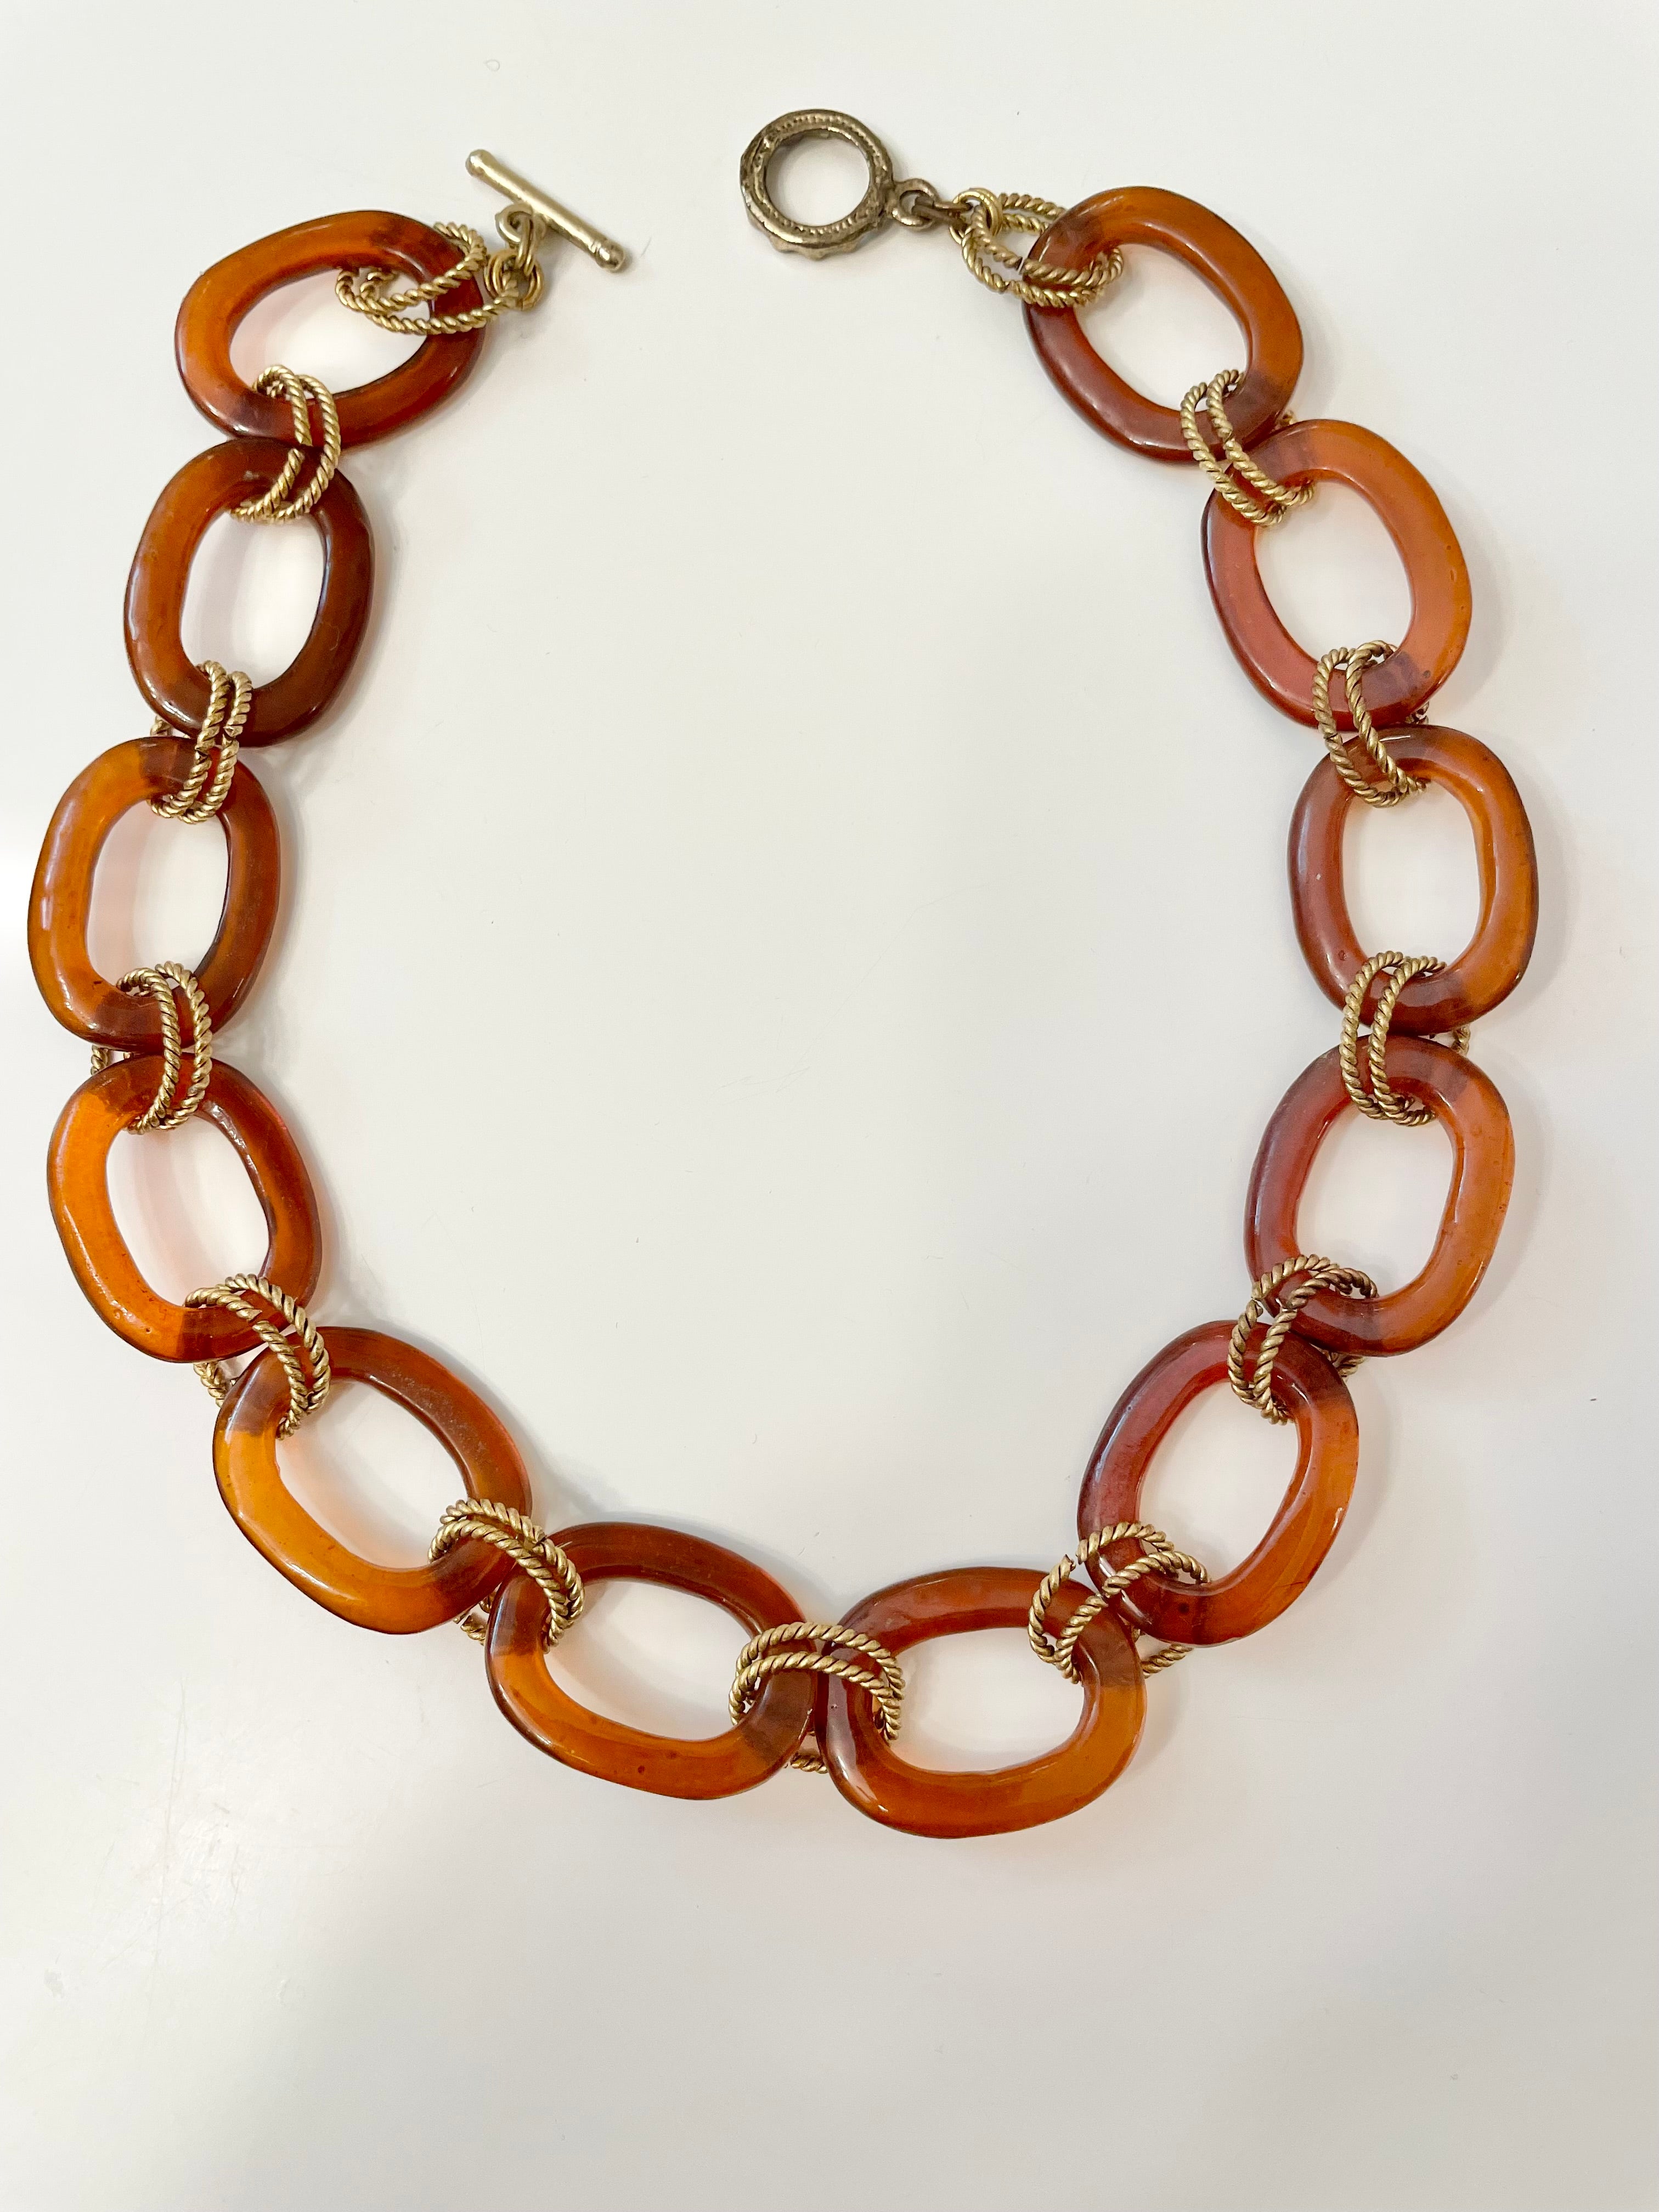 Vintage 1970's classy amber lucite chainlink necklace.... so chic